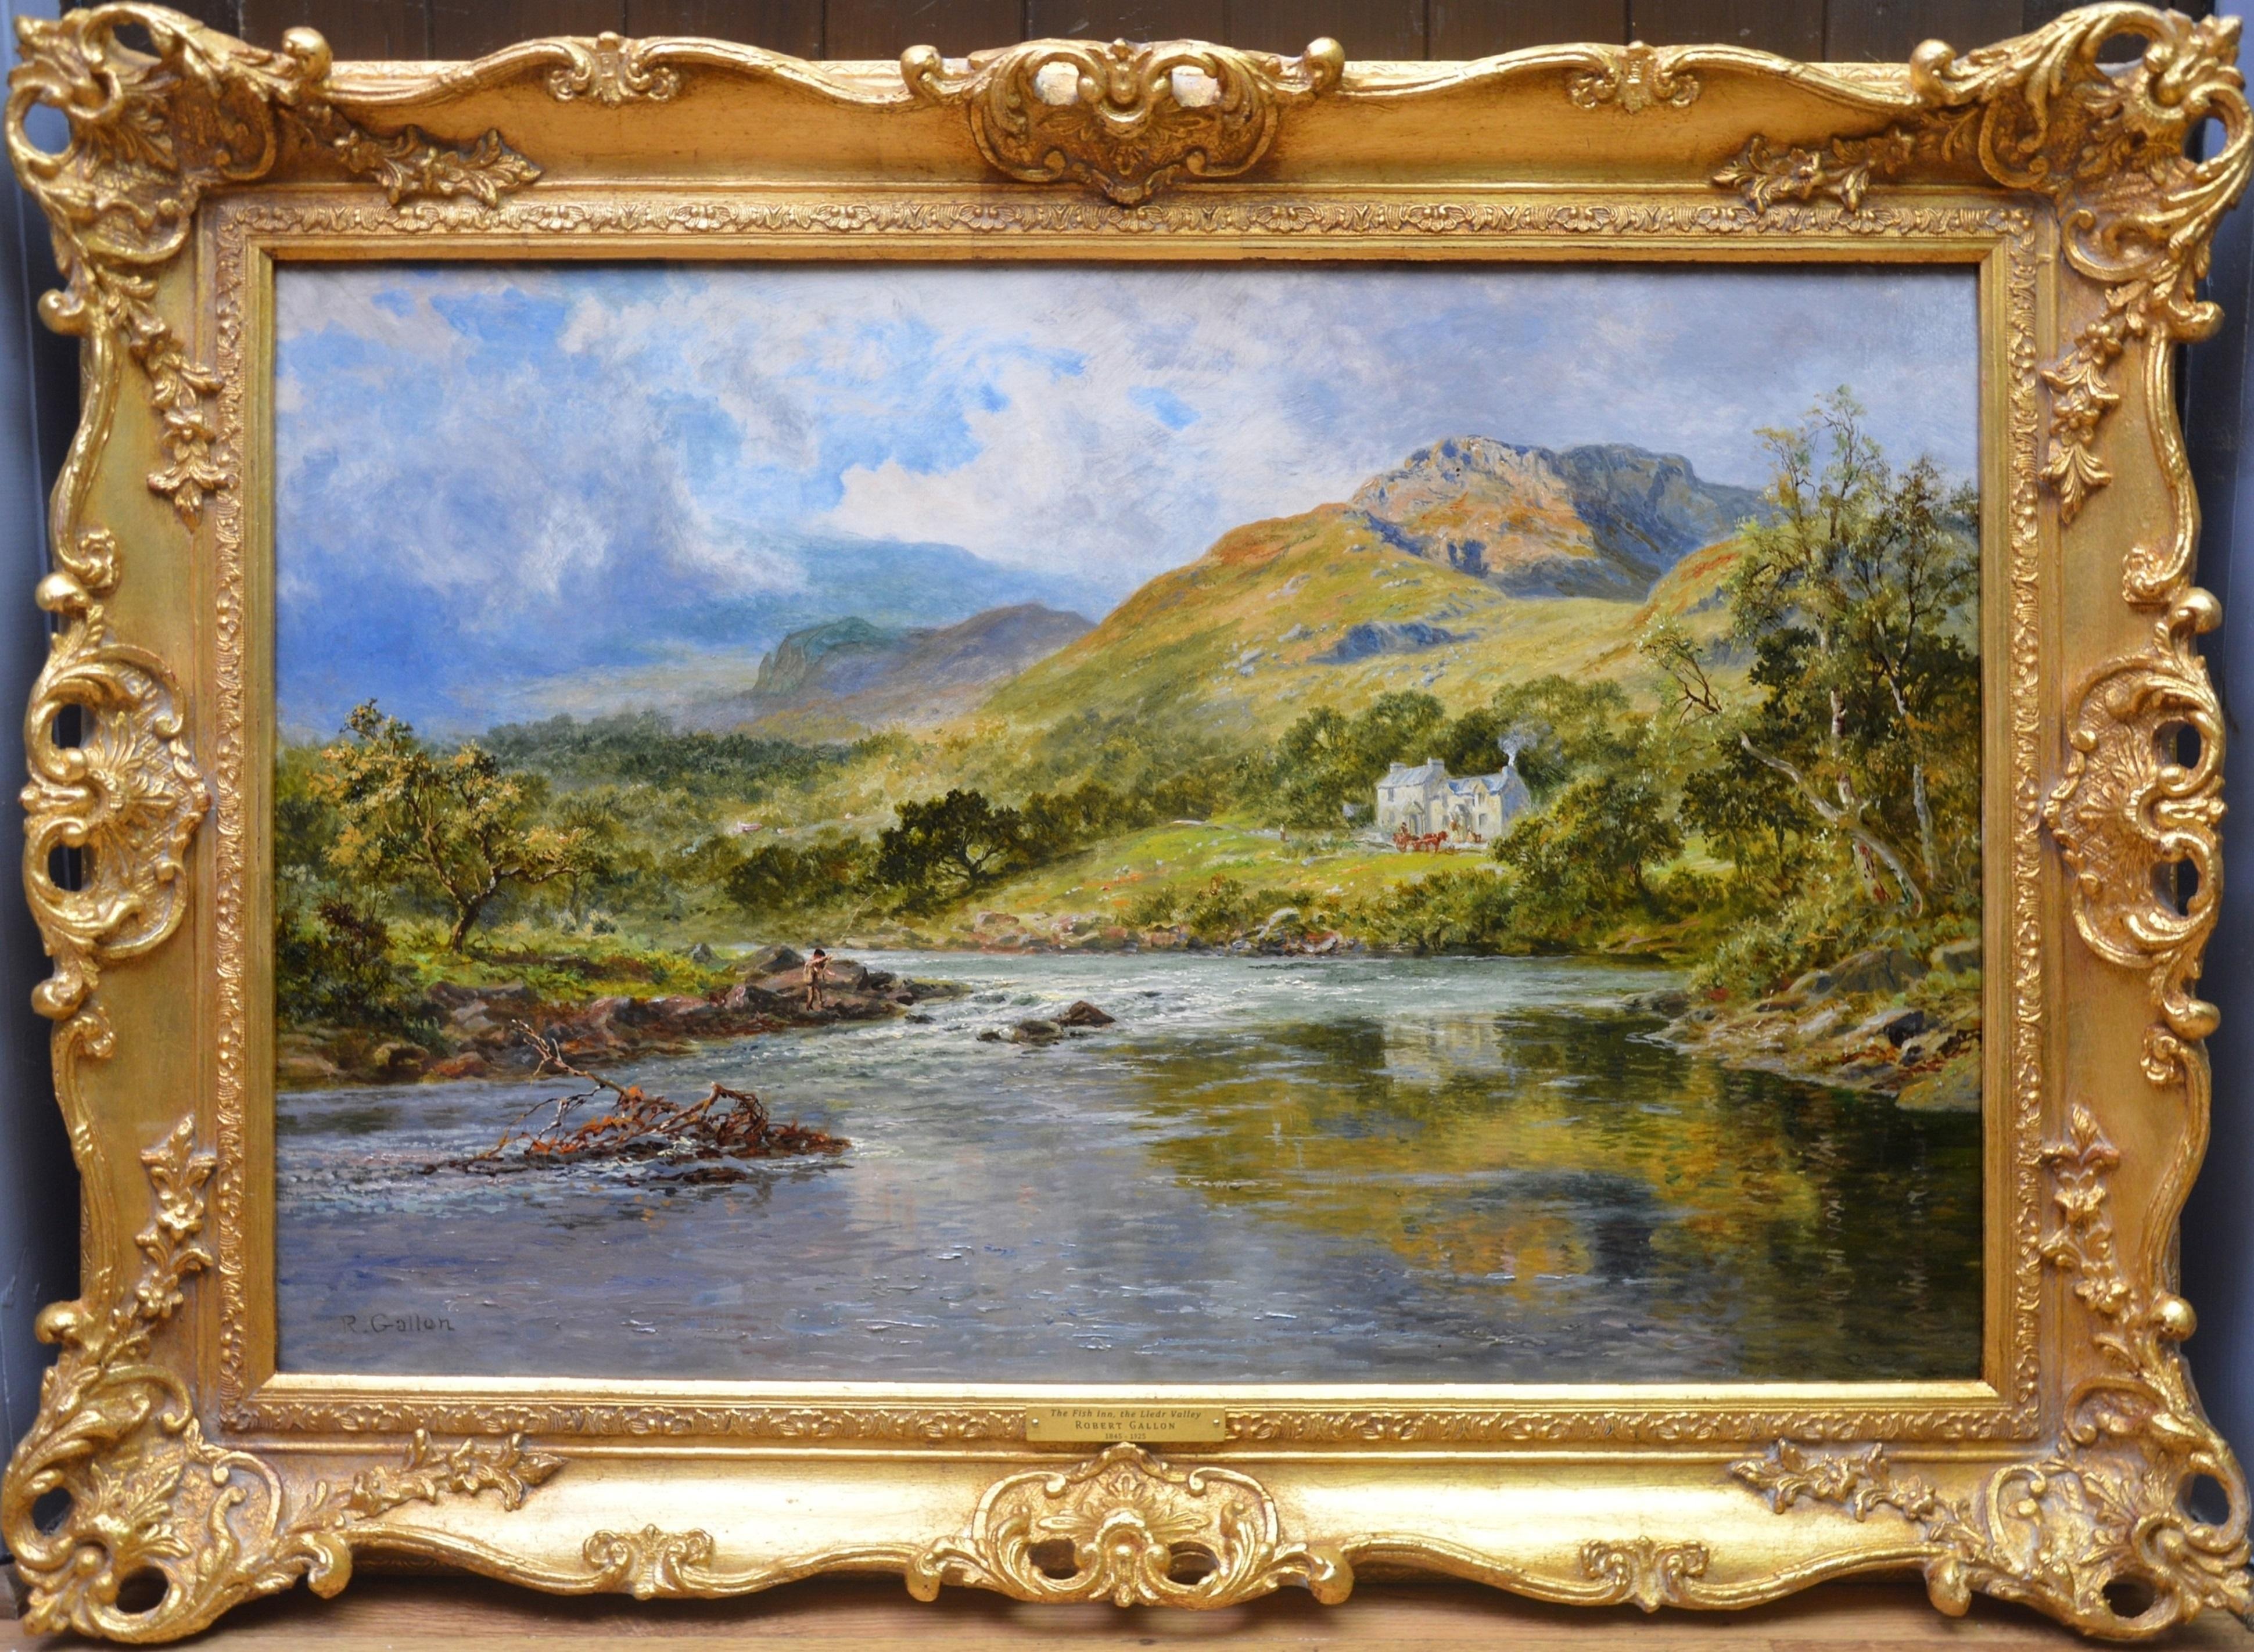 Robert Gallon Landscape Painting - The Fish Inn, Lledr Valley - 19th Century Landscape Oil Painting River Fishing